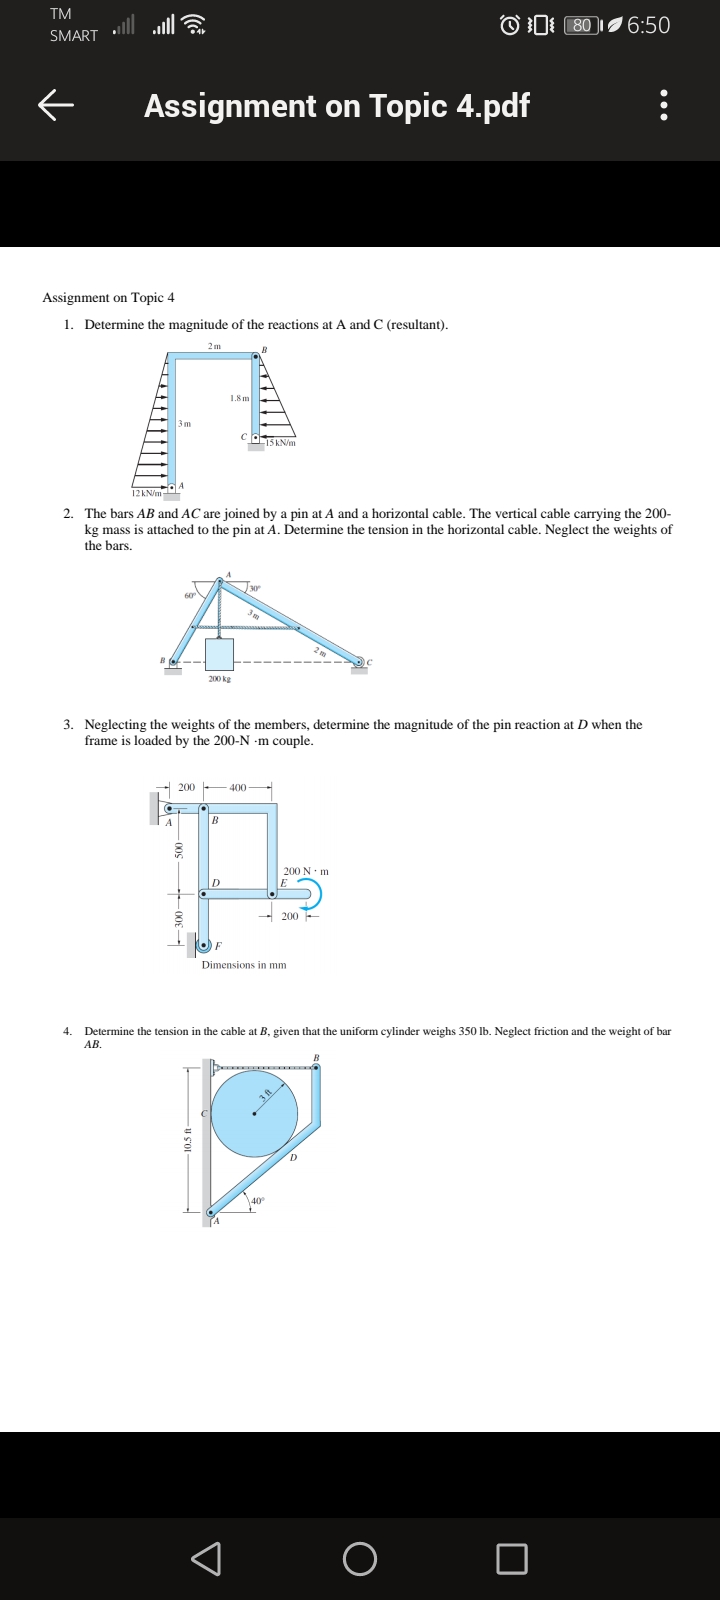 TM
ull
OD 80 6:50
SMART
Assignment on Topic 4.pdf
Assignment on Topic 4
1. Determine the magnitude of the reactions at A and C (resultant).
2m
1.8 m
15 KN/m
2. The bars AB and AC are joined by a pin at A and a horizontal cable. The vertical cable carrying the 200-
kg mass is attached to the pin at A. Determine the tension in the horizontal cable. Neglect the weights of
the bars.
200 kg
3. Neglecting the weights of the members, determine the magnitude of the pin reaction at D when the
frame is loaded by the 200-N -m couple.
200 -400
200 N· m
D
- 200 -
Dimensions in mm
4.
Determine the tension in the cable at B, given that the uniform cylinder weighs 350 Ib. Neglect friction and the weight of bar
АВ.
40
u so
